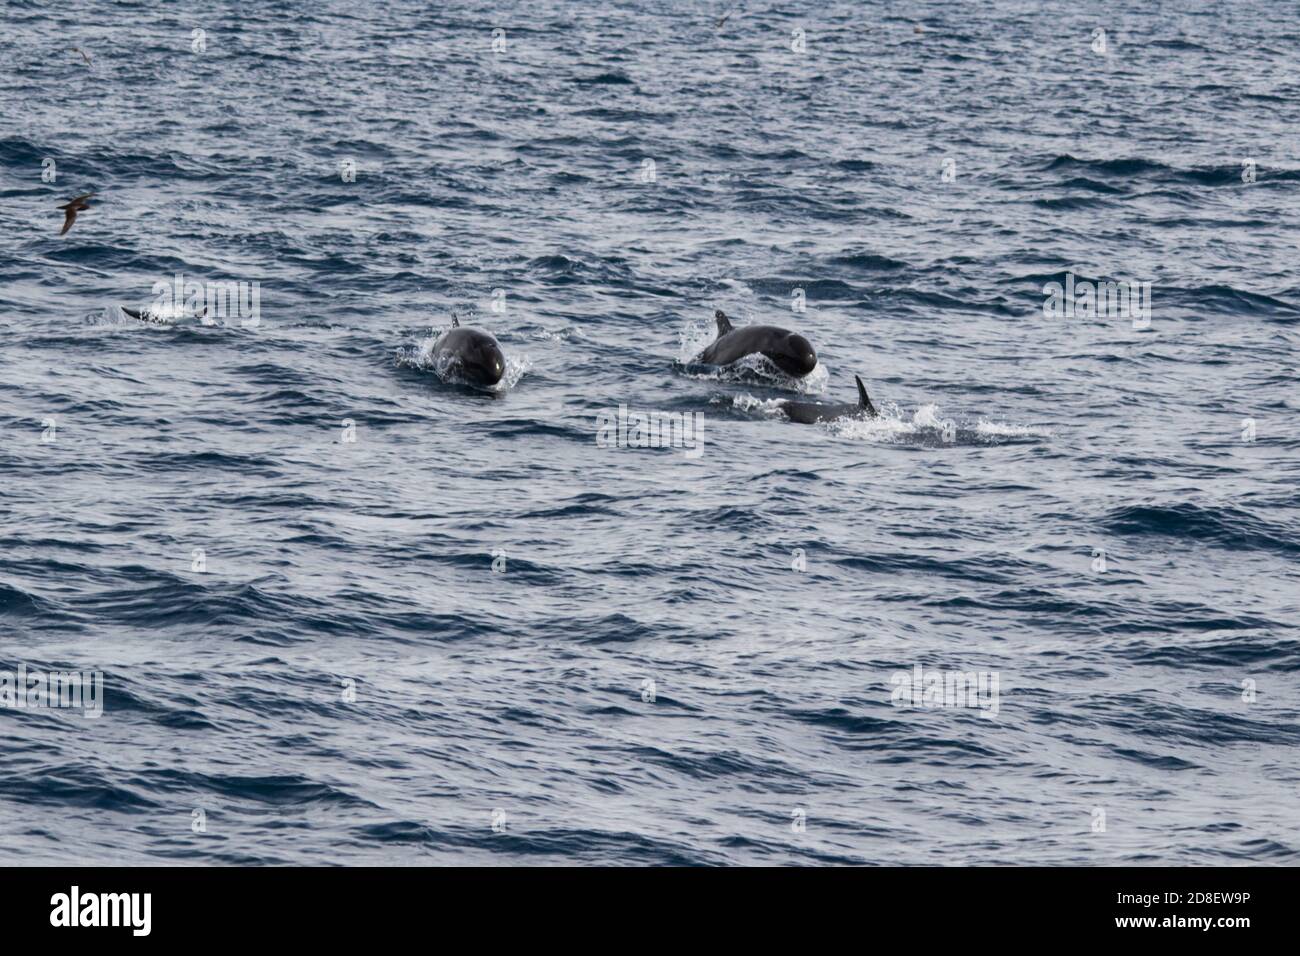 The False Killer Whale (Pseudorca crassidens) is a species of oceanic dolphin.  These specimens were photographed off New Zealand. Stock Photo